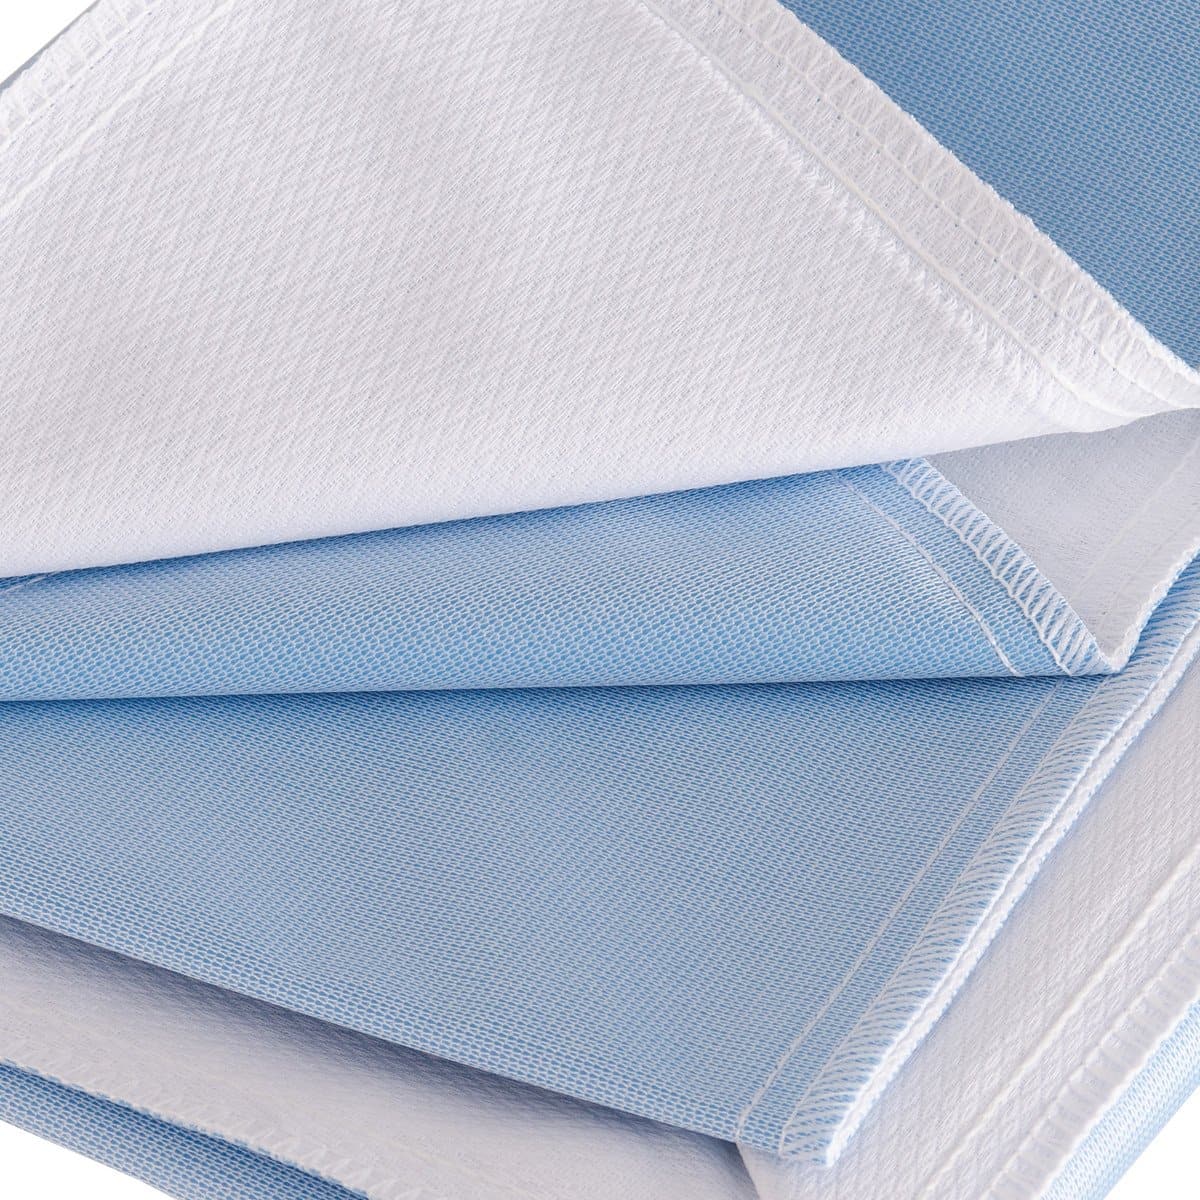 DMI Waterproof Furniture and Bed Protector Pad, 3 Ply, Reuseable - 34 x 24 - Blue - Senior.com Underpads